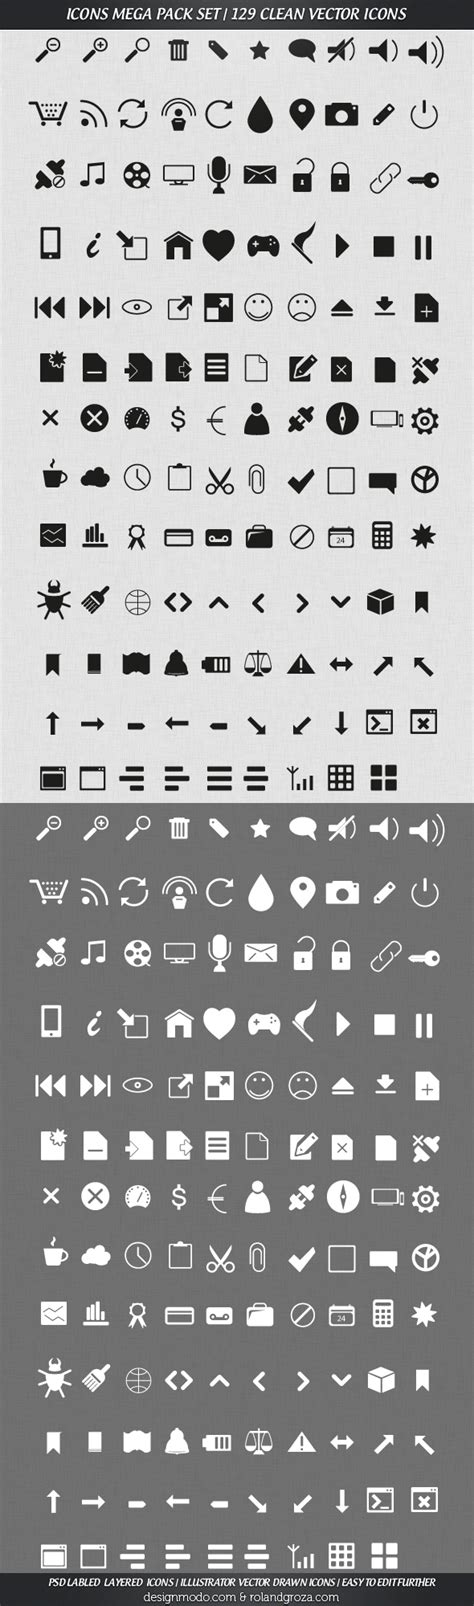 Free Mega Pack Vector Icons Set 129 Clean Icons Designmodo Vector